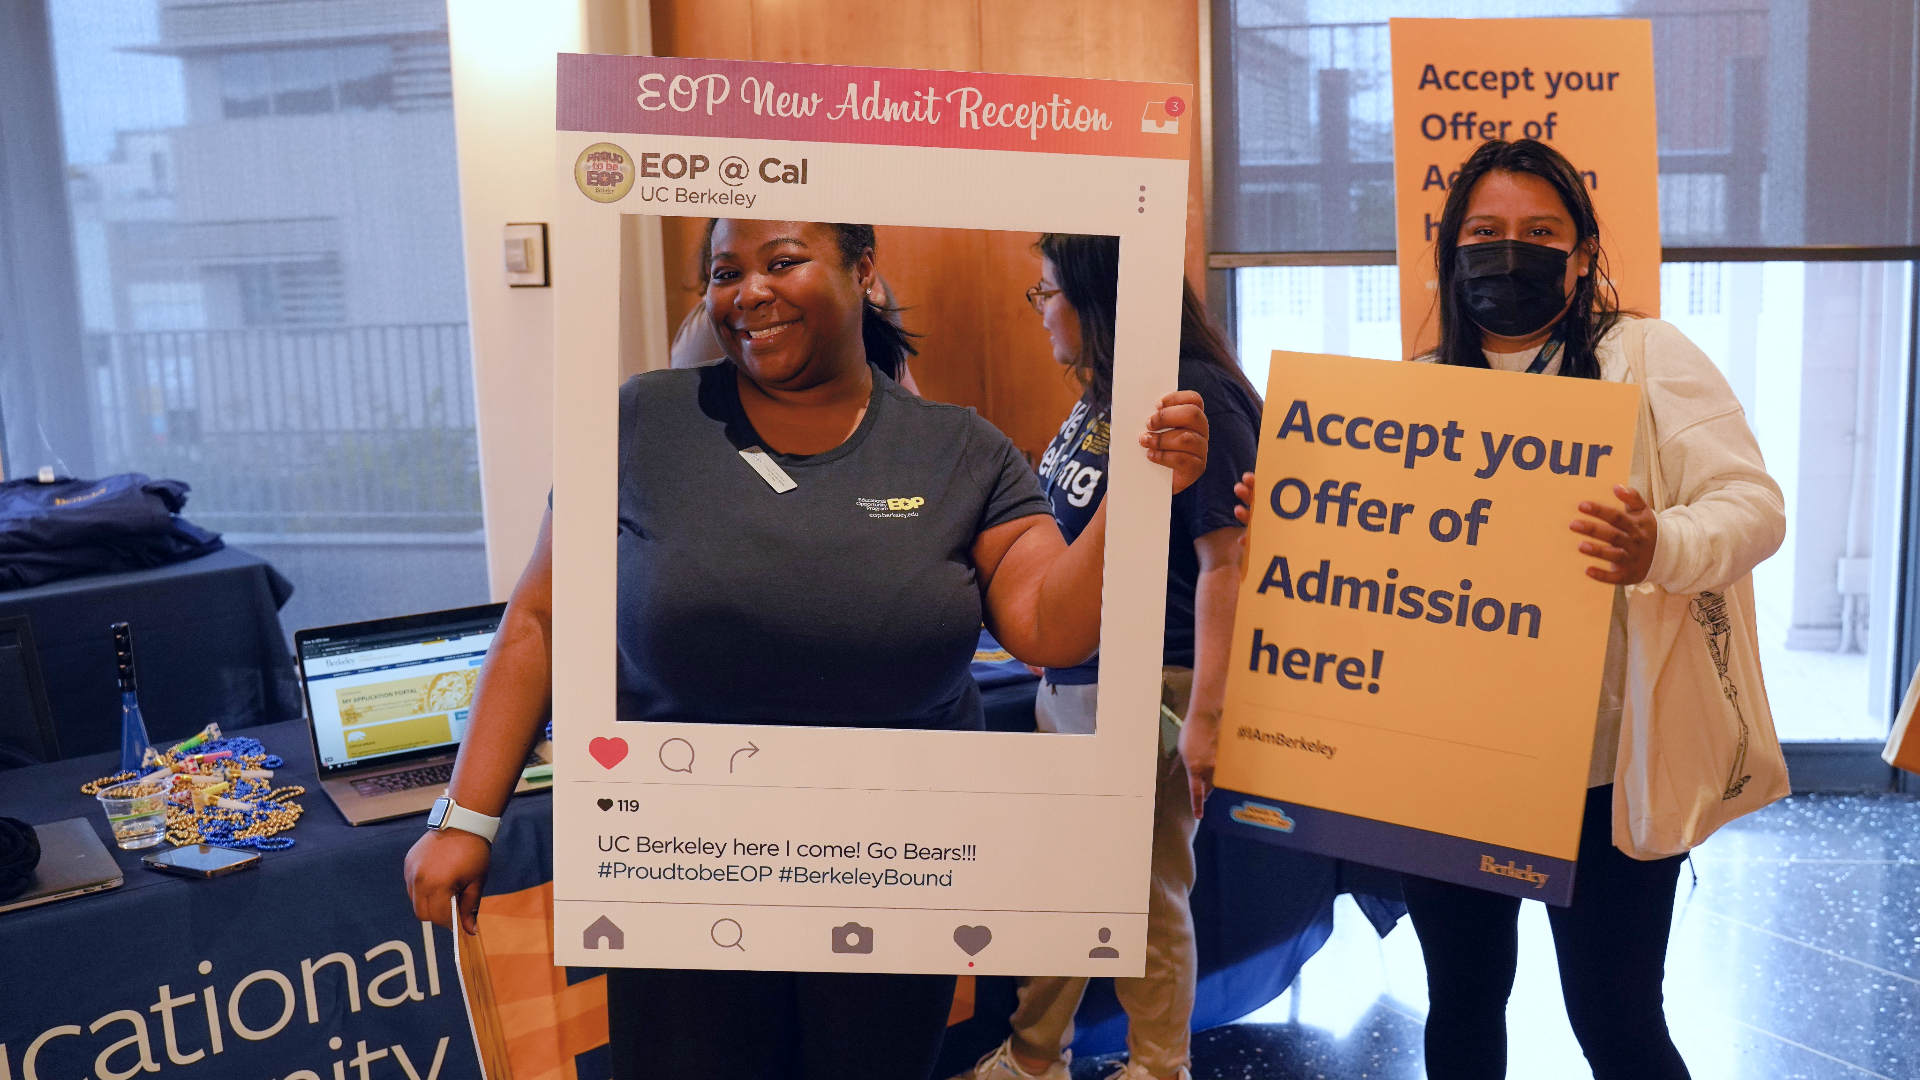 EOP & Student Staff Encourage Students to Accept Offer